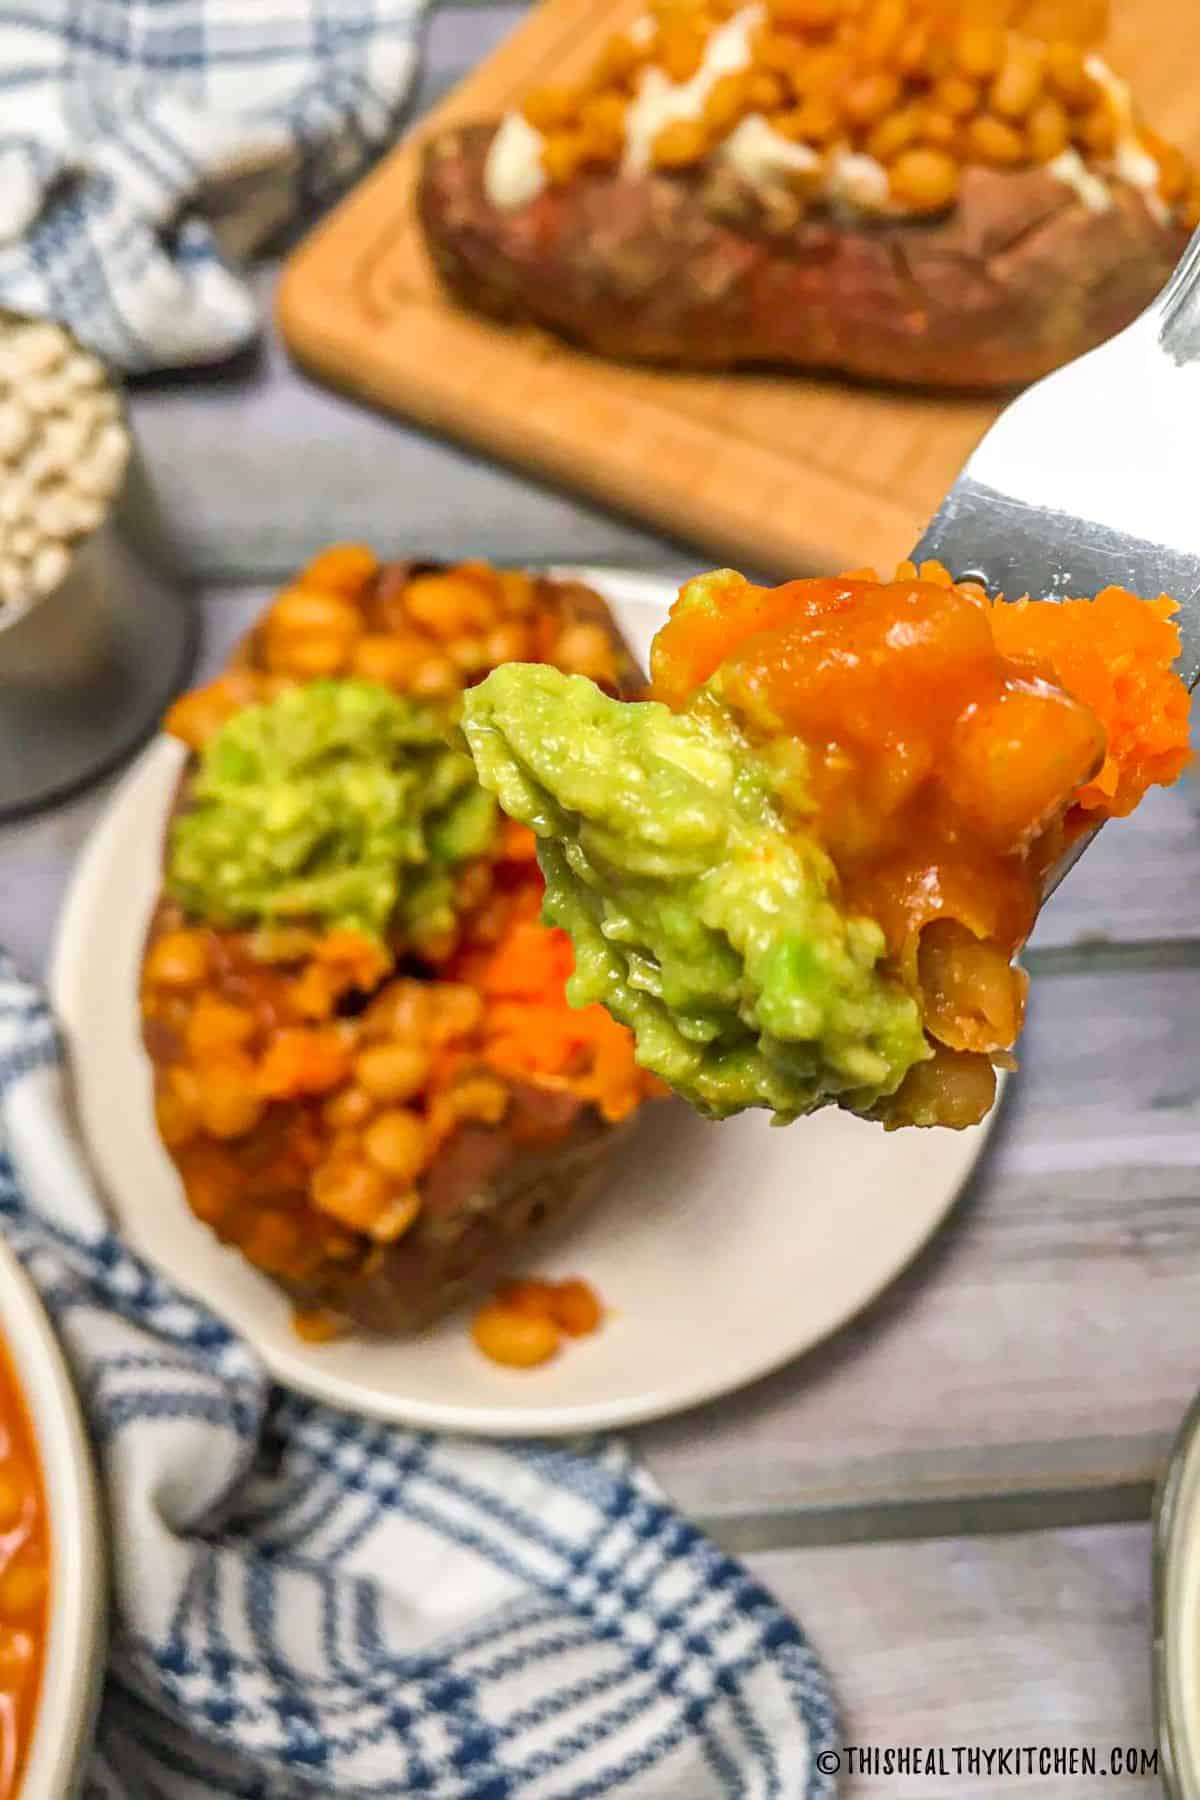 Forkful of sweet potato with beans and guacamole.